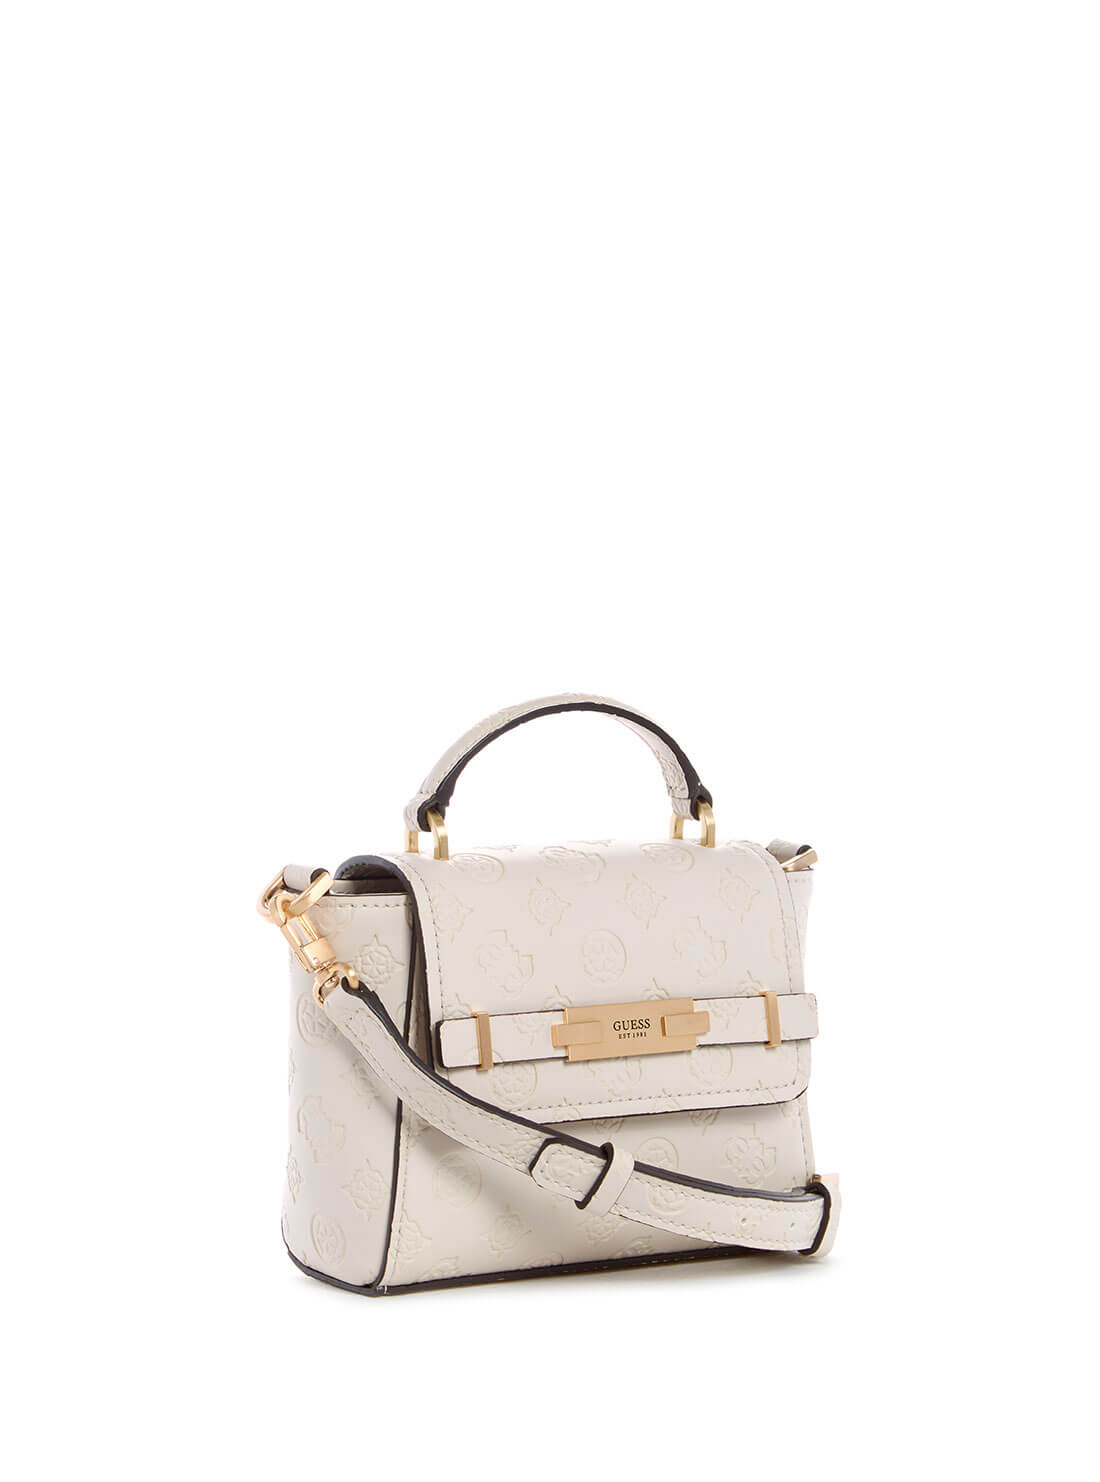 GUESS White Bea Mini Top Handle Bag side view